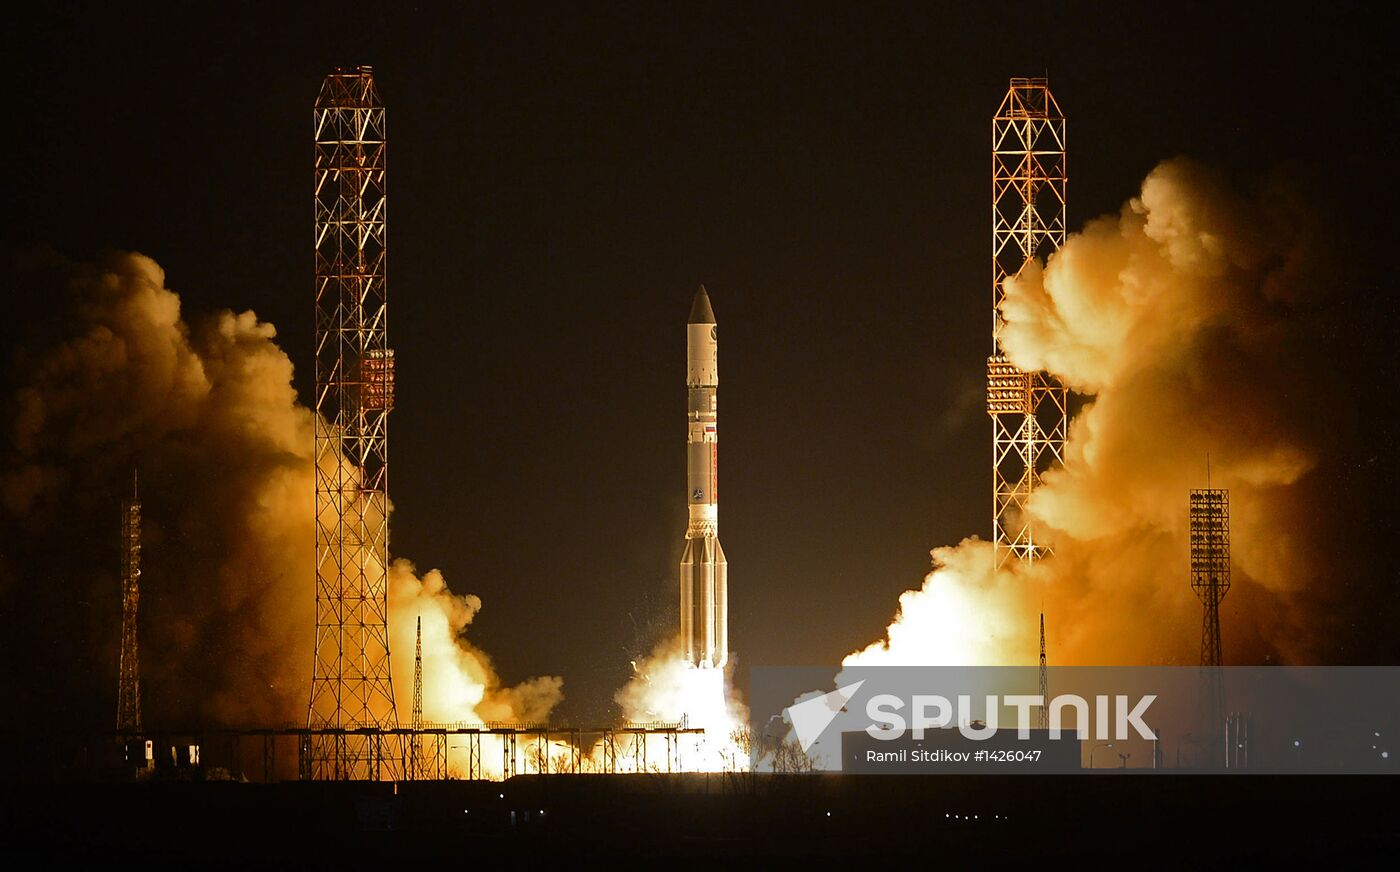 Launching of Proton-M rocket with Briz-M upper stage